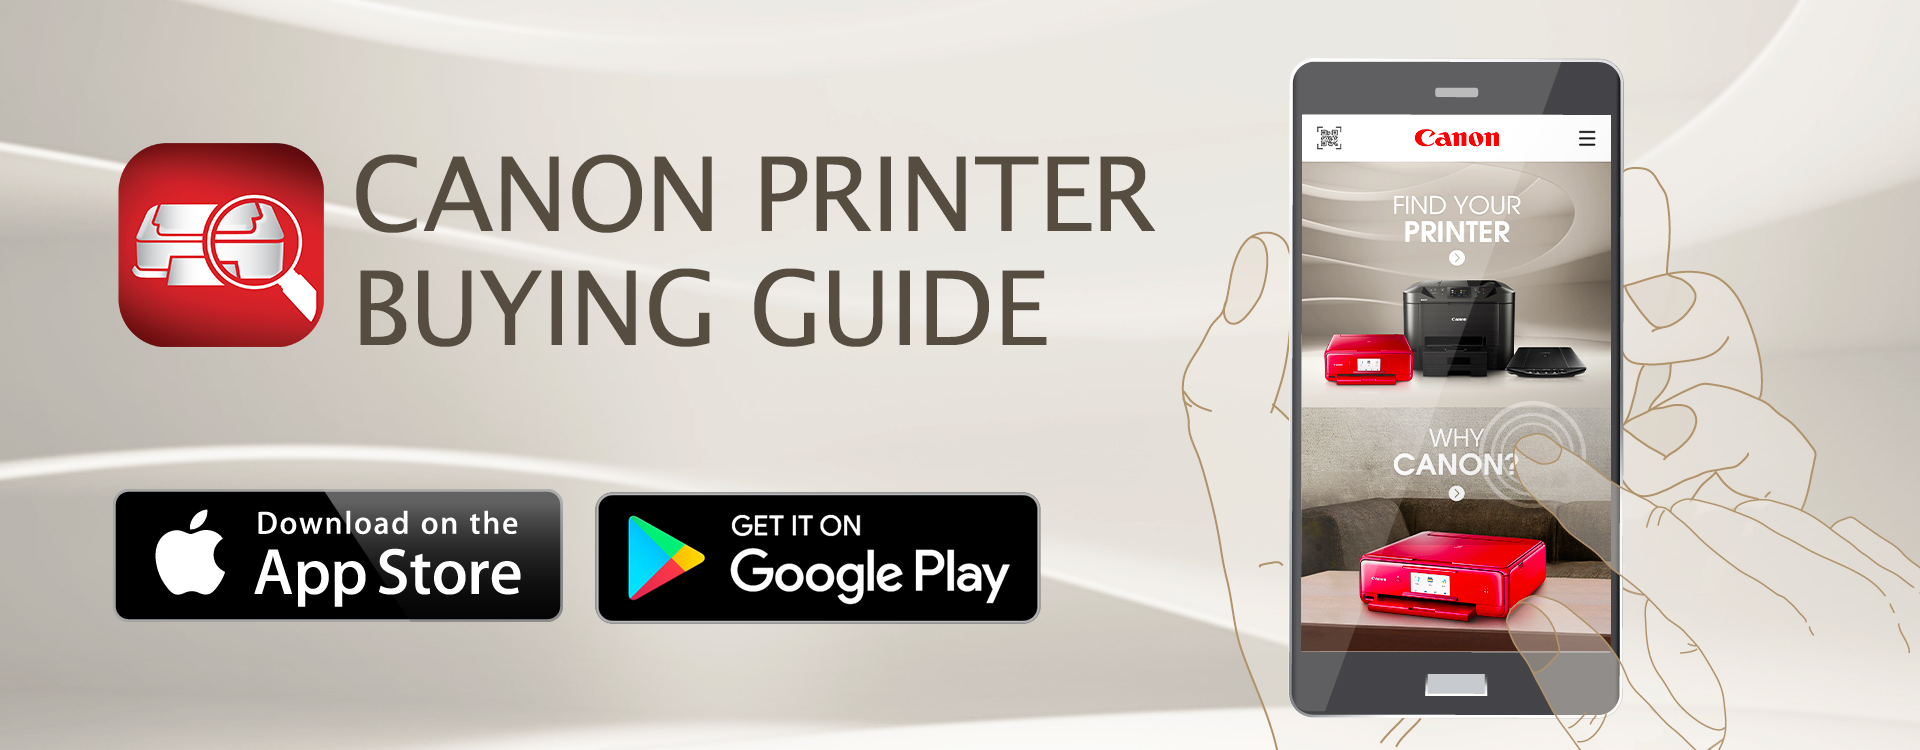 Canon Printer Buying Guide_1920x750_banner_v1